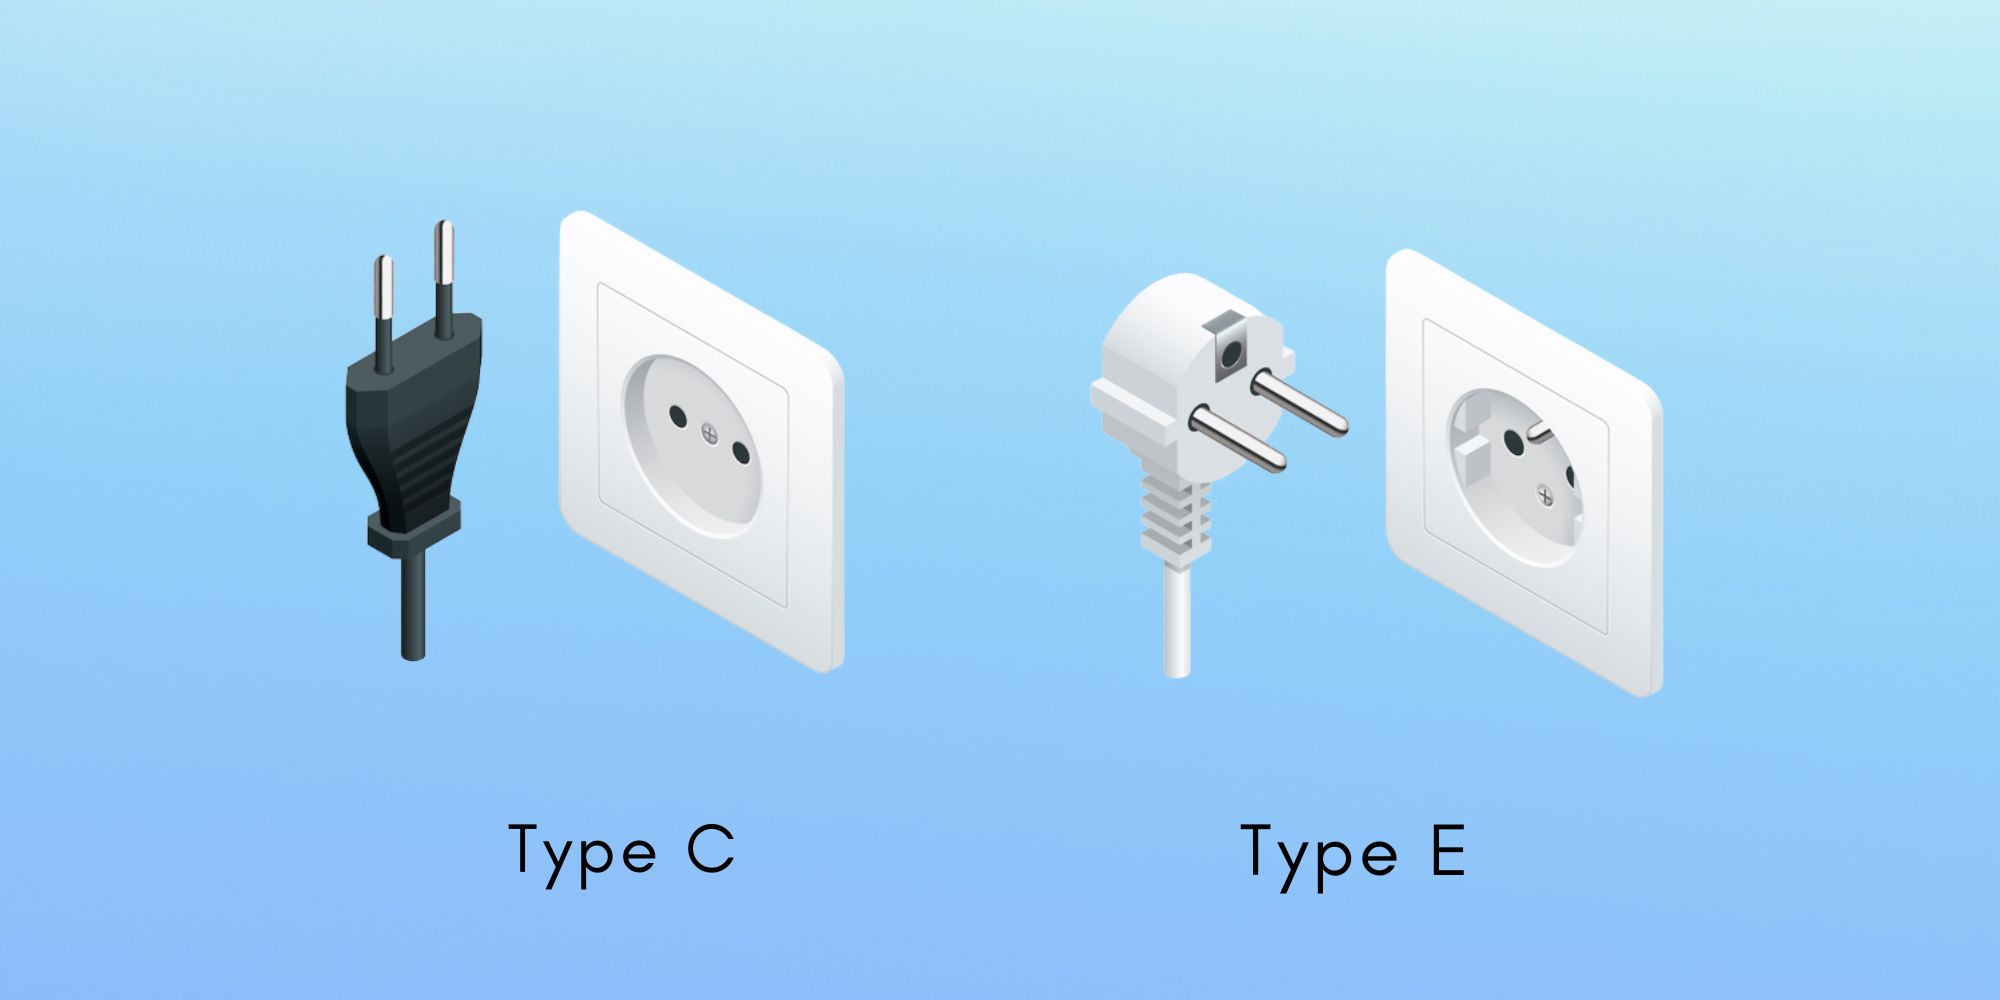 Djibouti Power Plugs and Sockets: Type C and Type E
